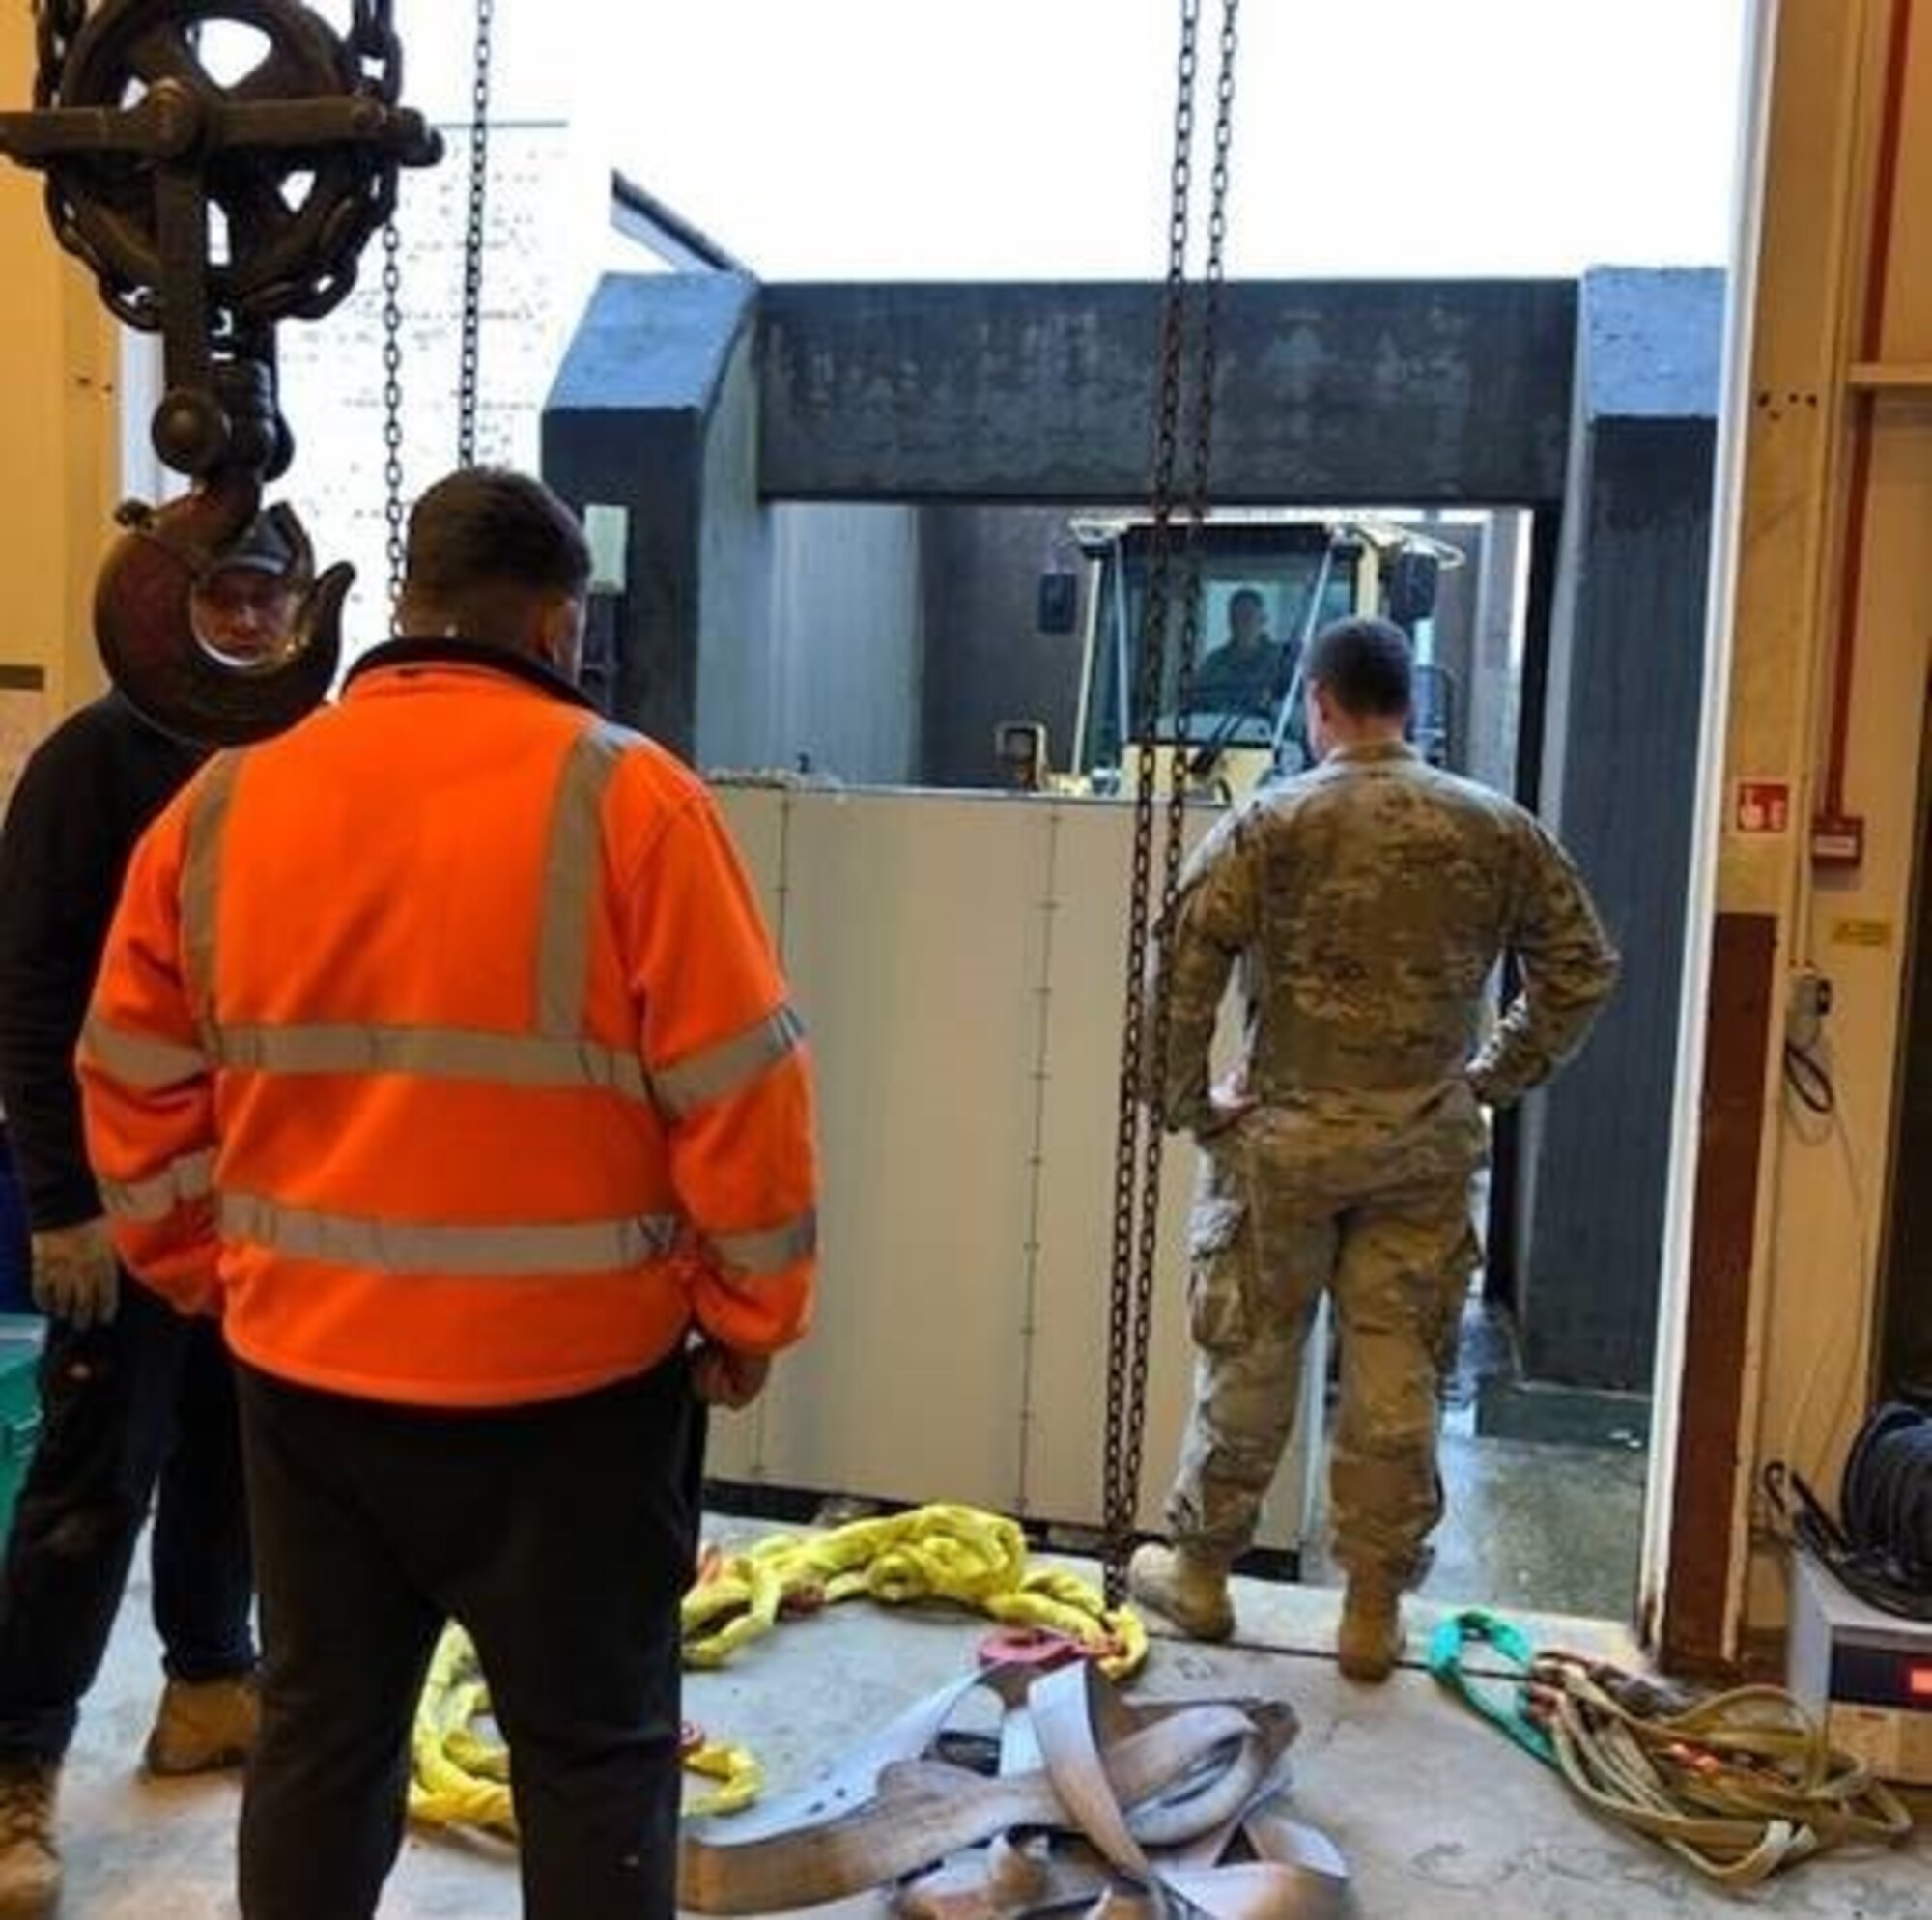 Airmen and civilian personnel from the 422nd Communications and Civil Engineer Squadrons, place a B31 Uninterruptable Power System on a forklift, Nov.14, 2019, at RAF Croughton, England. The B31 UPS helps power the 422nd CS technical control facility that serves as one of the main hubs of communication across 5 MAJCOMS. (Courtesy Photo)